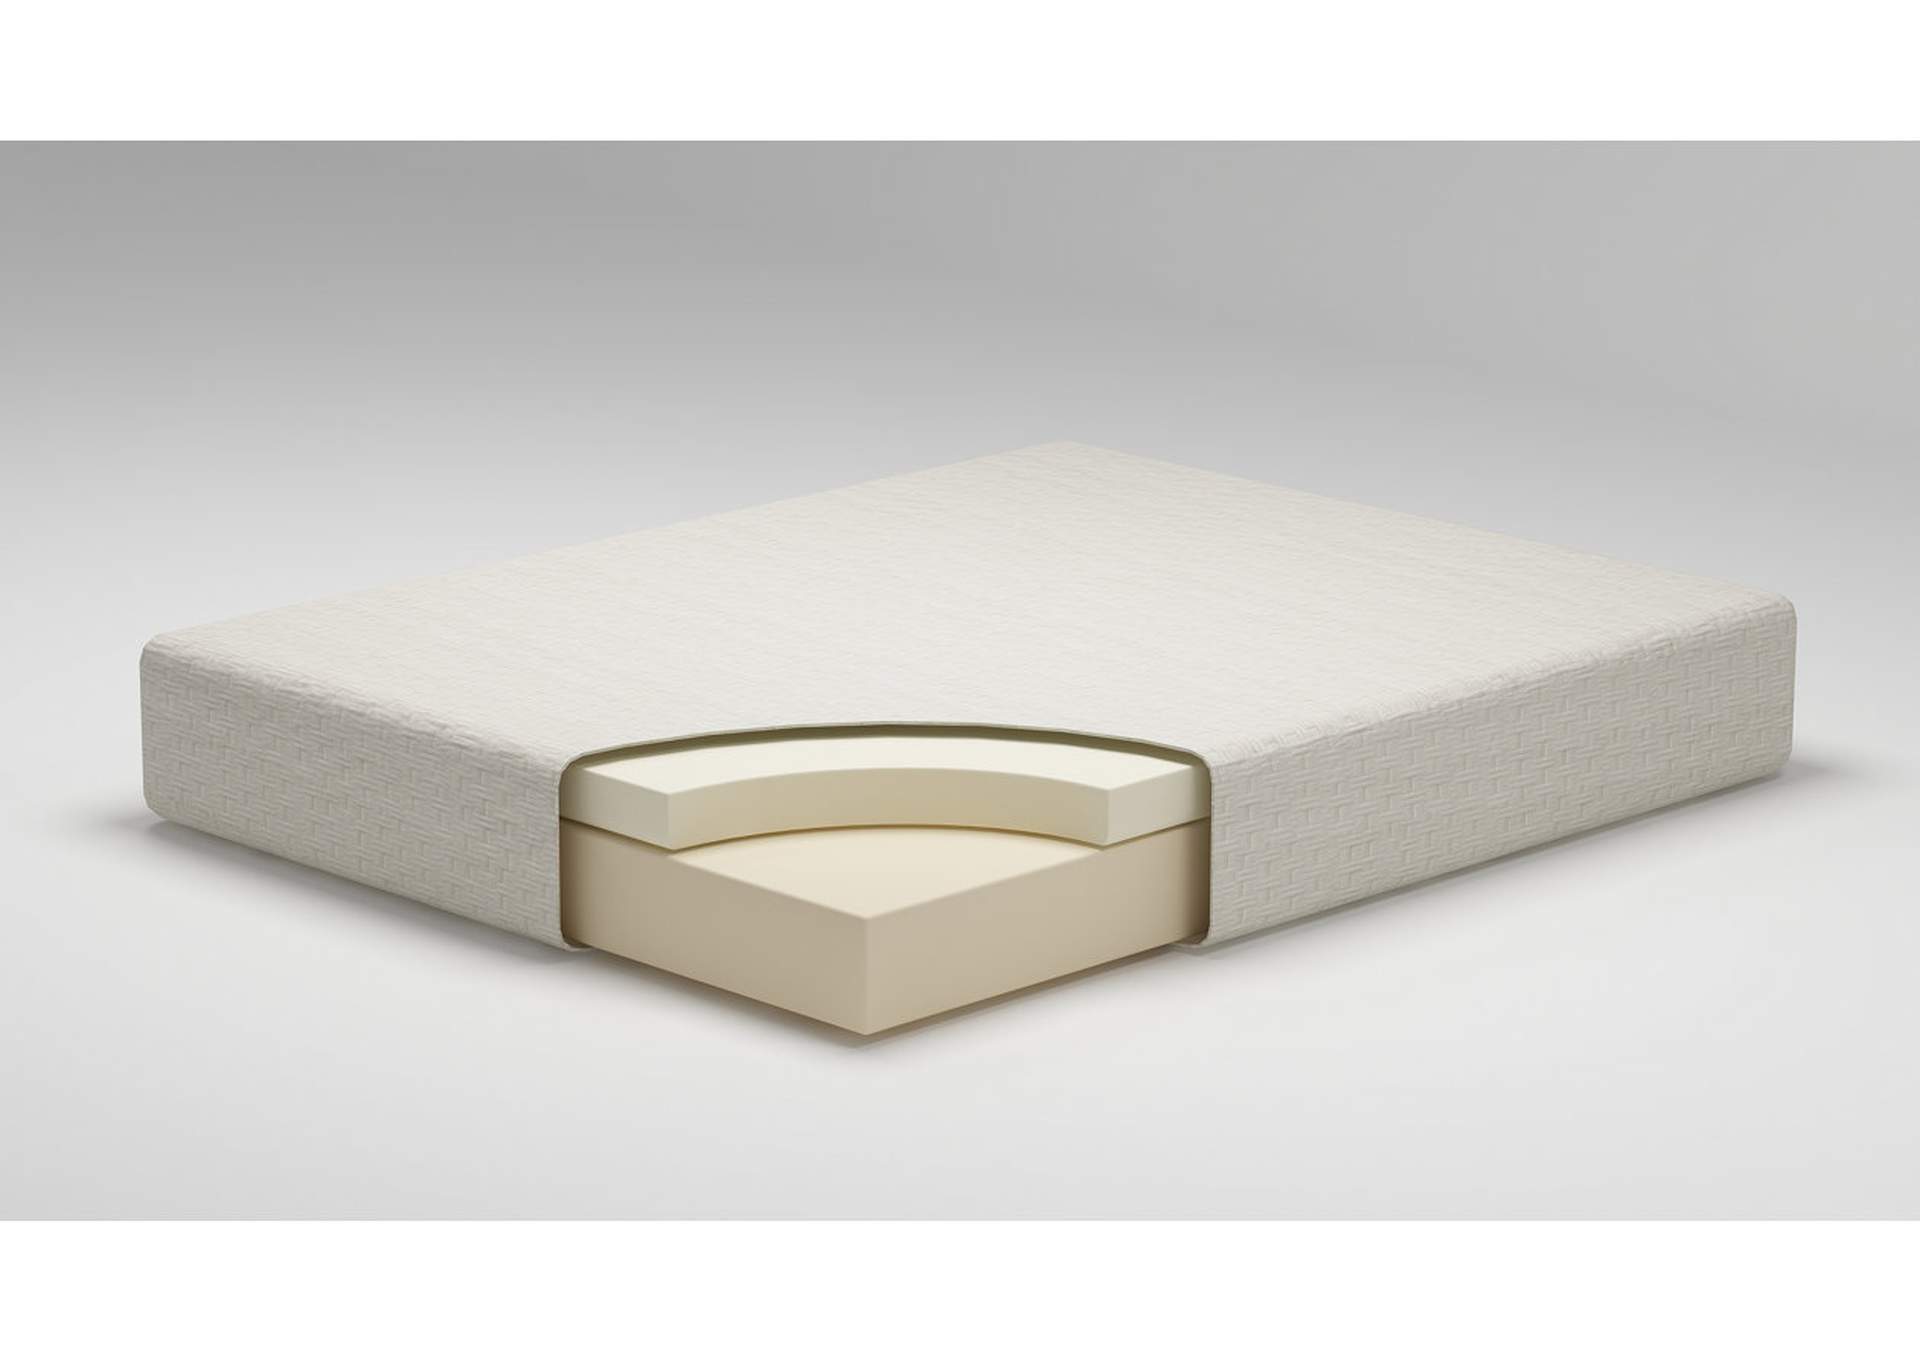 Chime 8 Inch Memory Foam Queen Mattress in a Box,Direct To Consumer Express